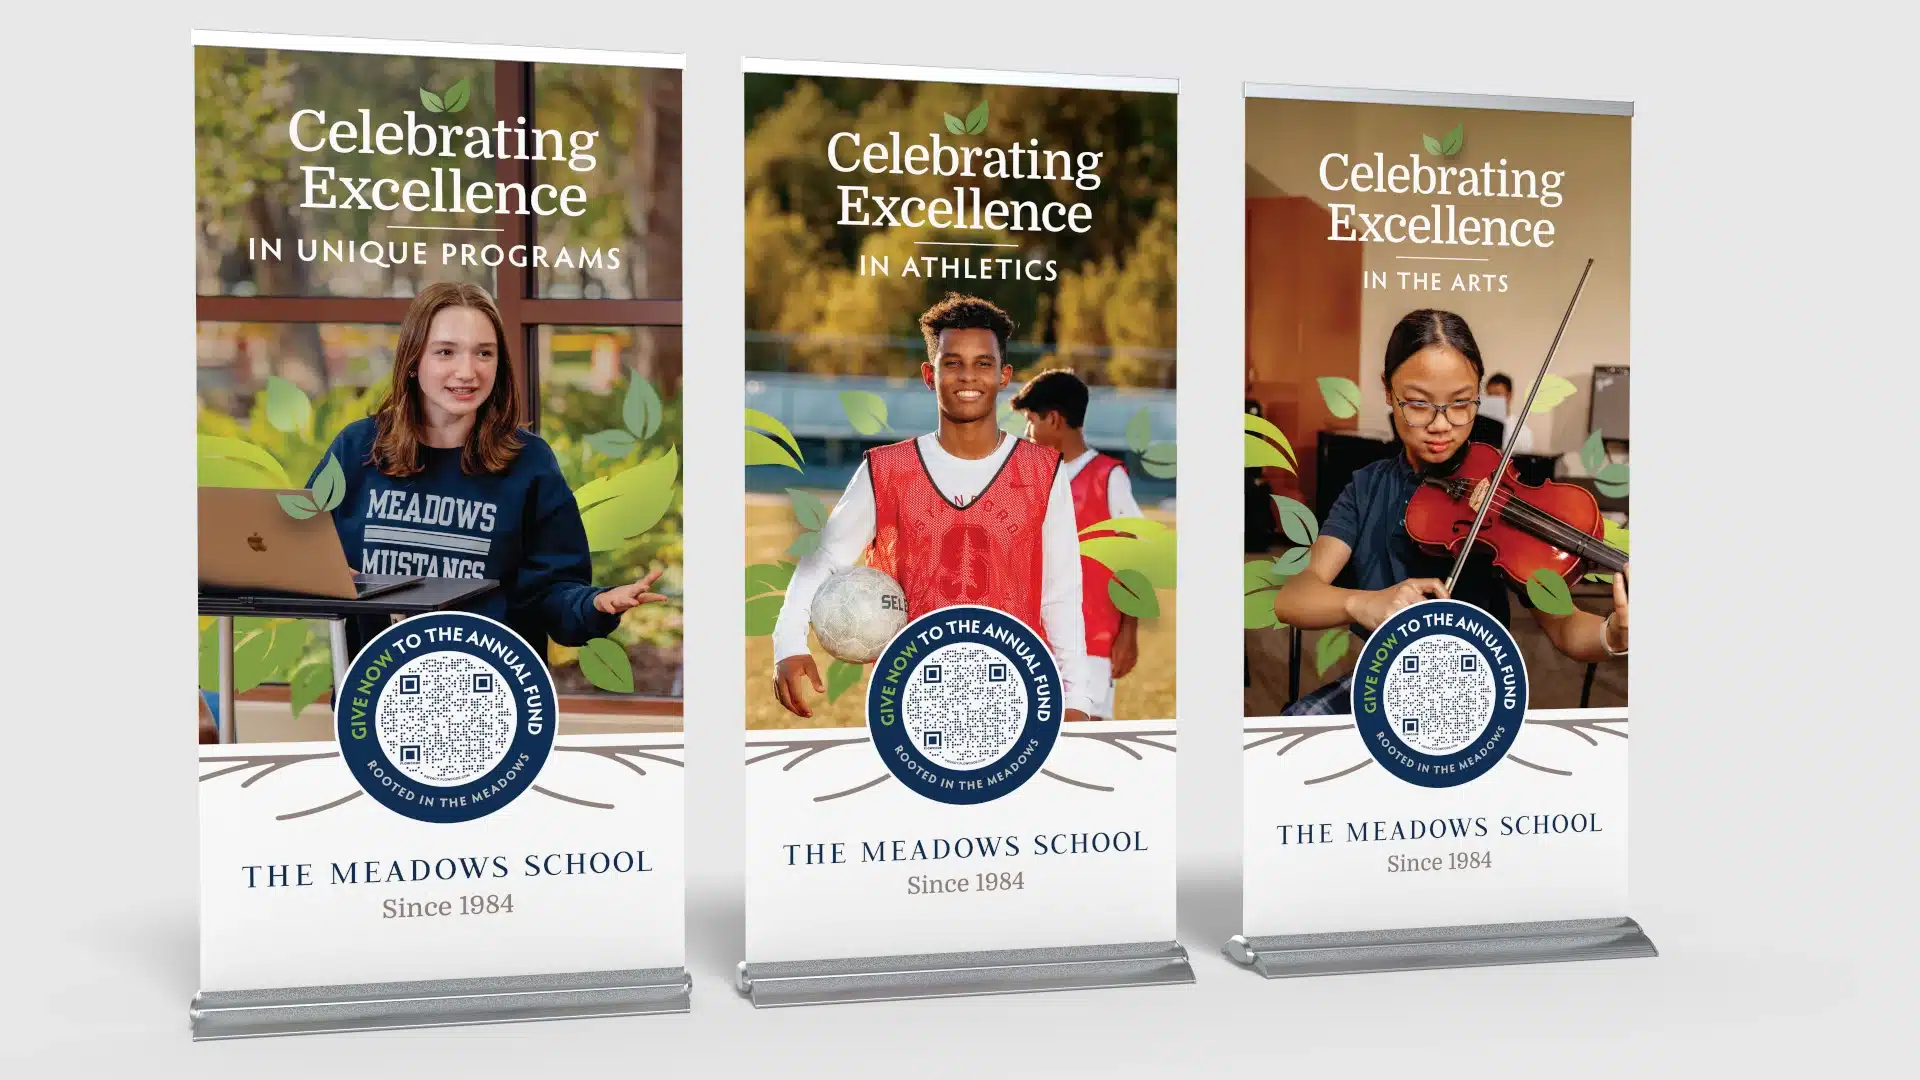 The Meadows School Fundraising Campaign Pop-up banners featuring activities